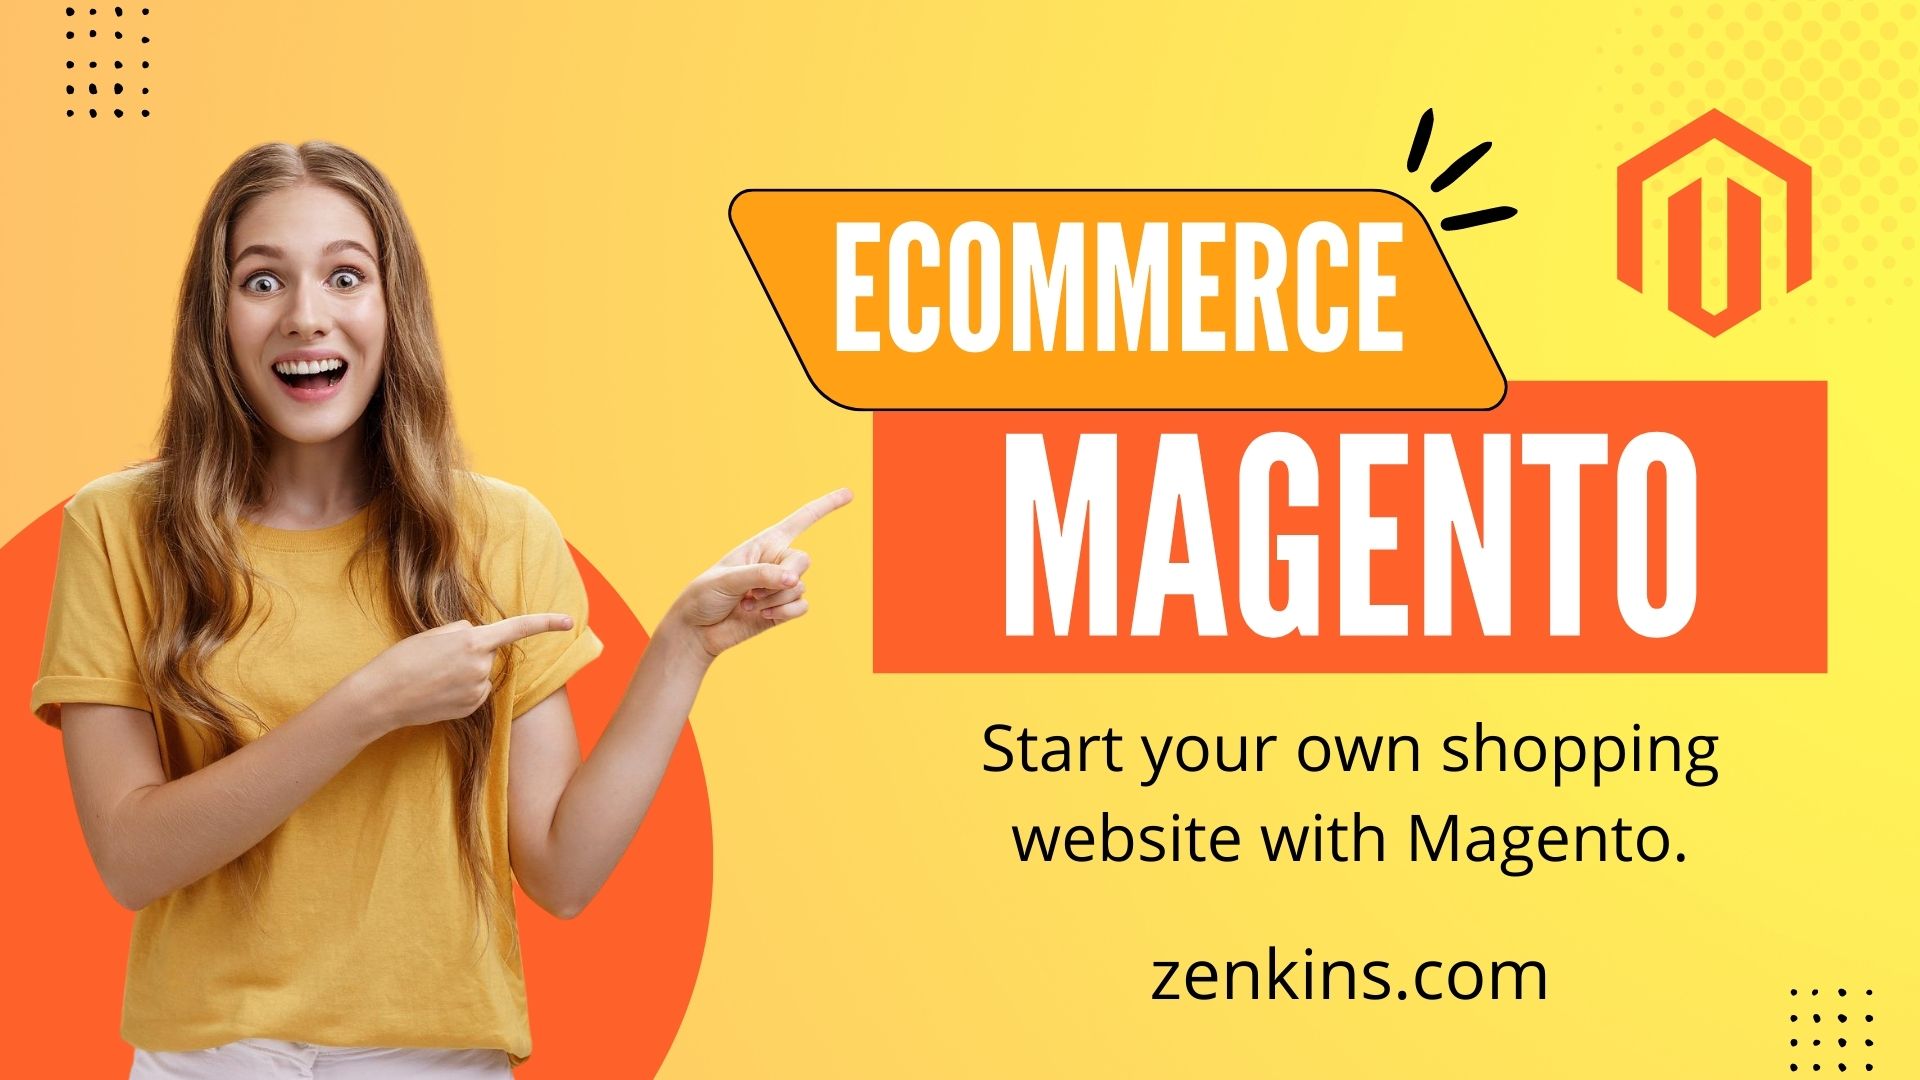 Hire Magento Developers in India